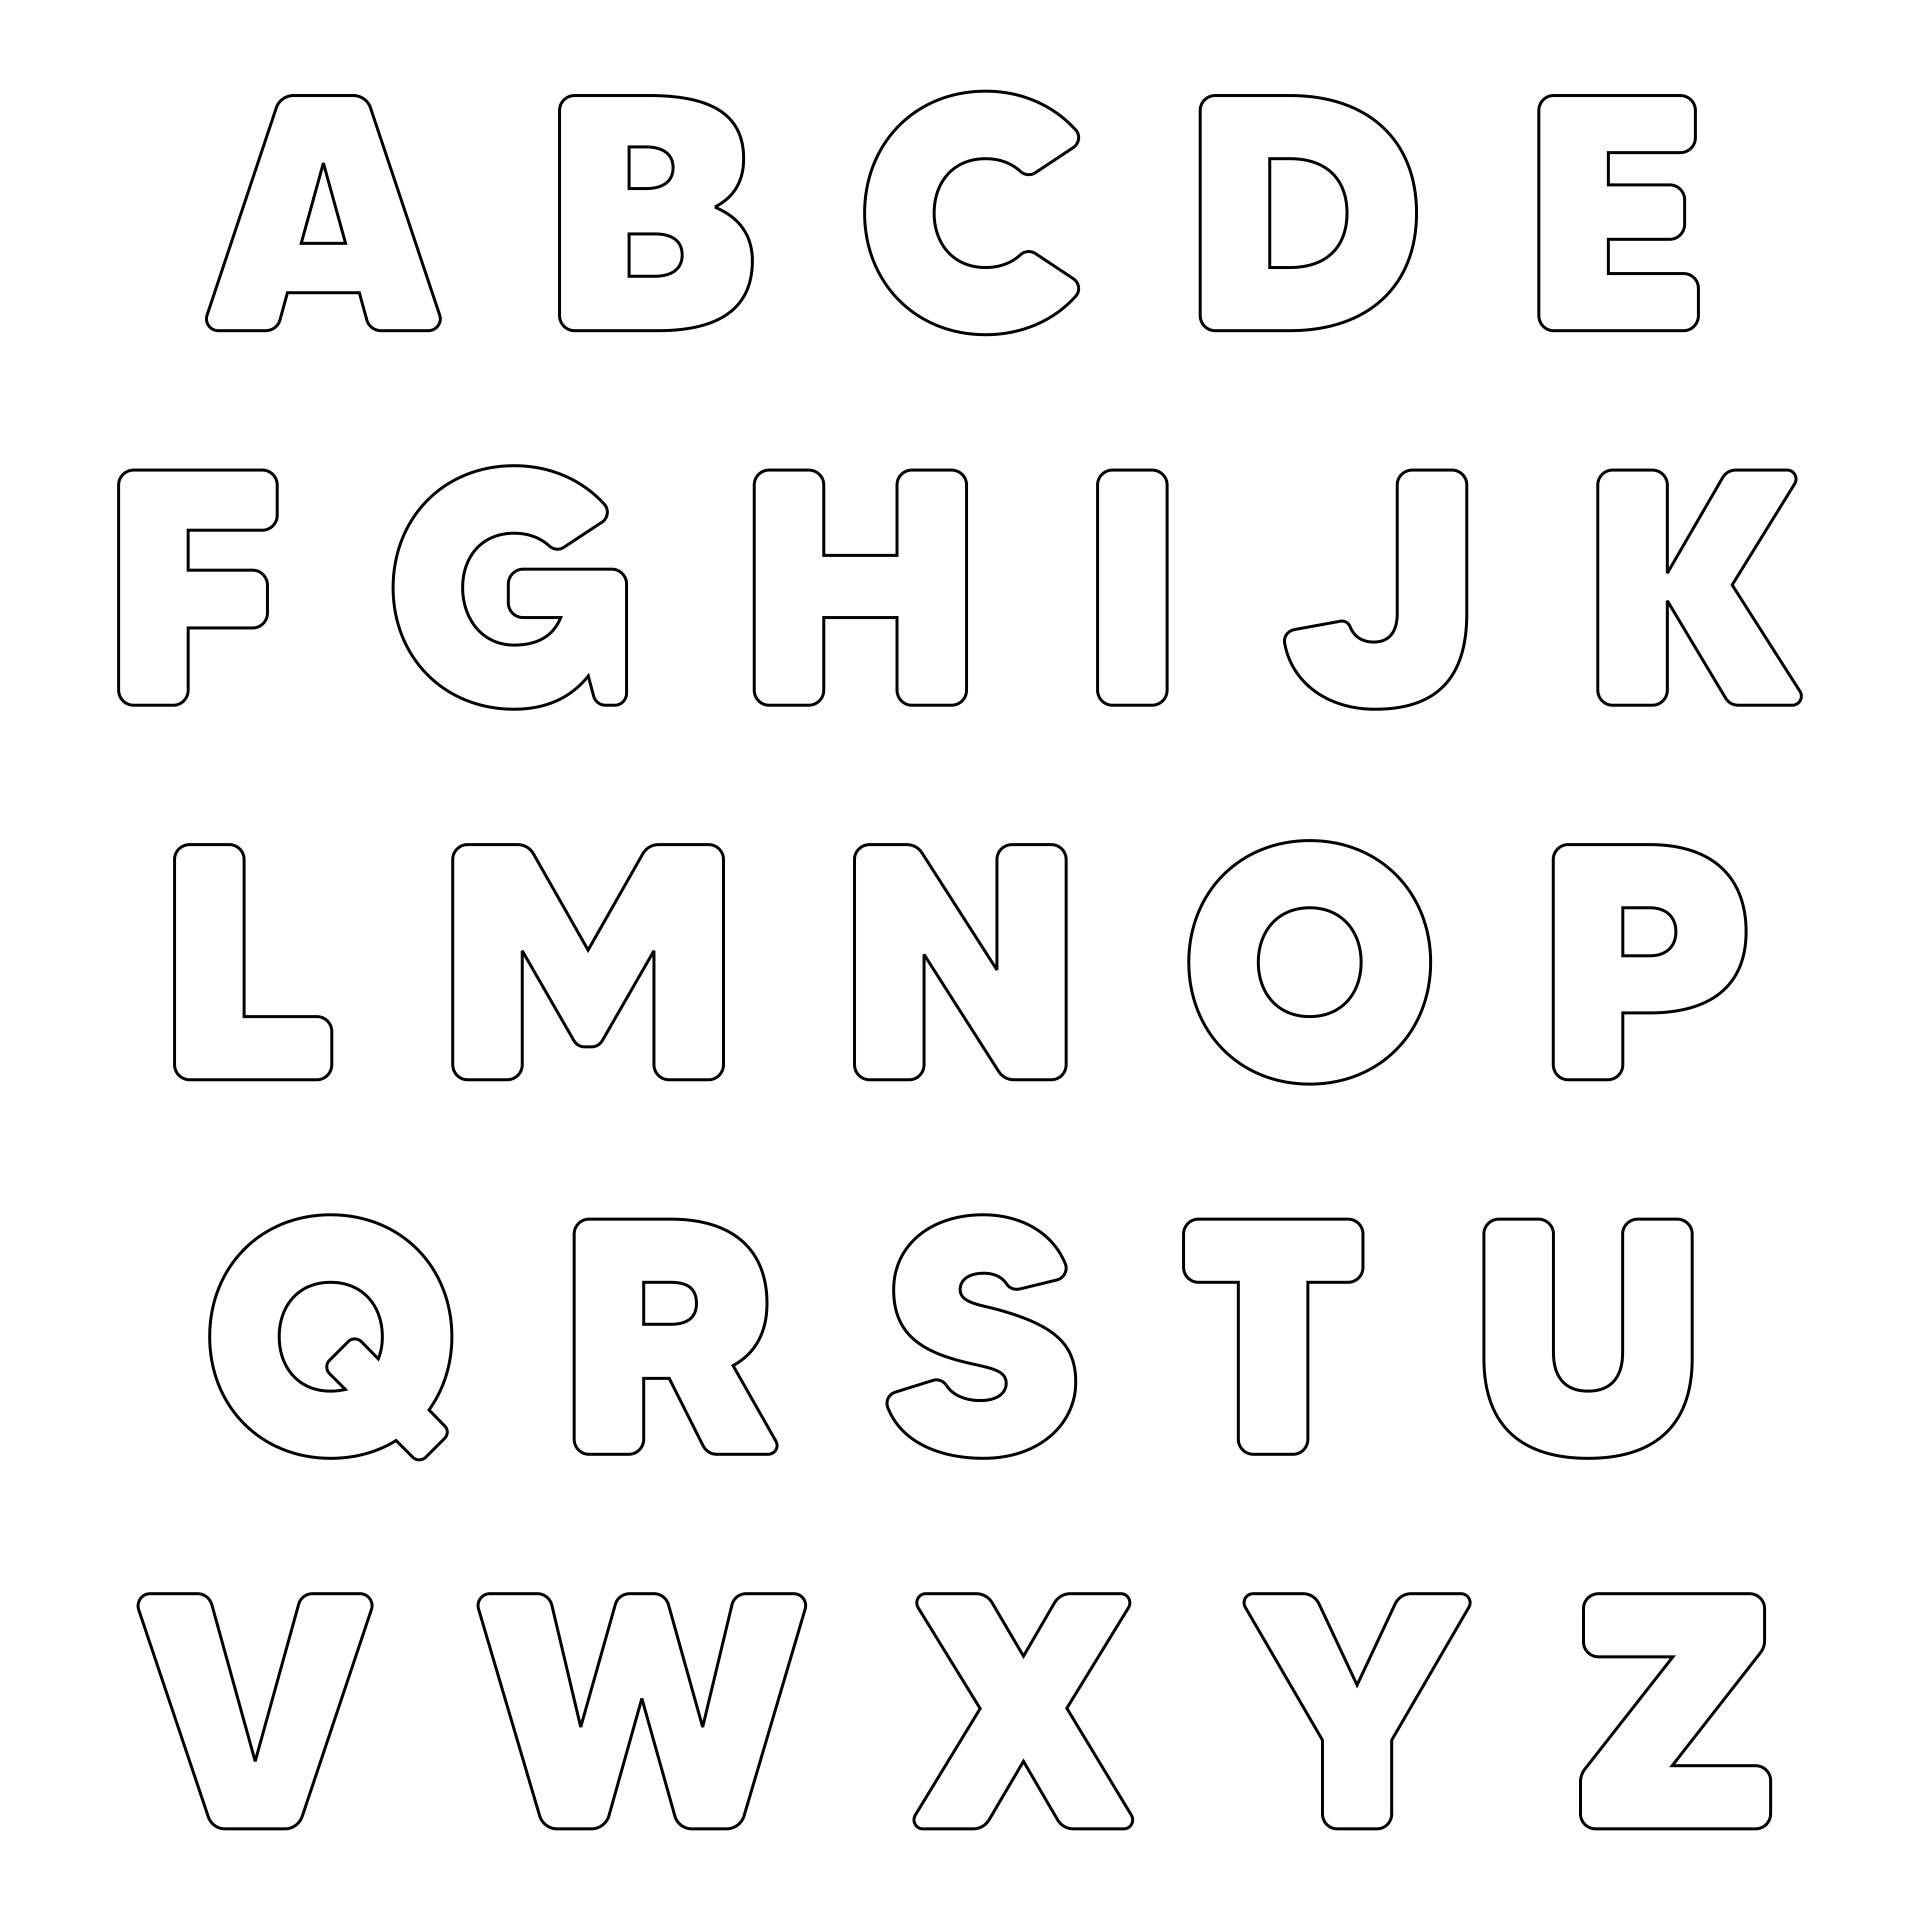 6 Best Printable Alphabet Letters To Cut PDF for Free at Printablee